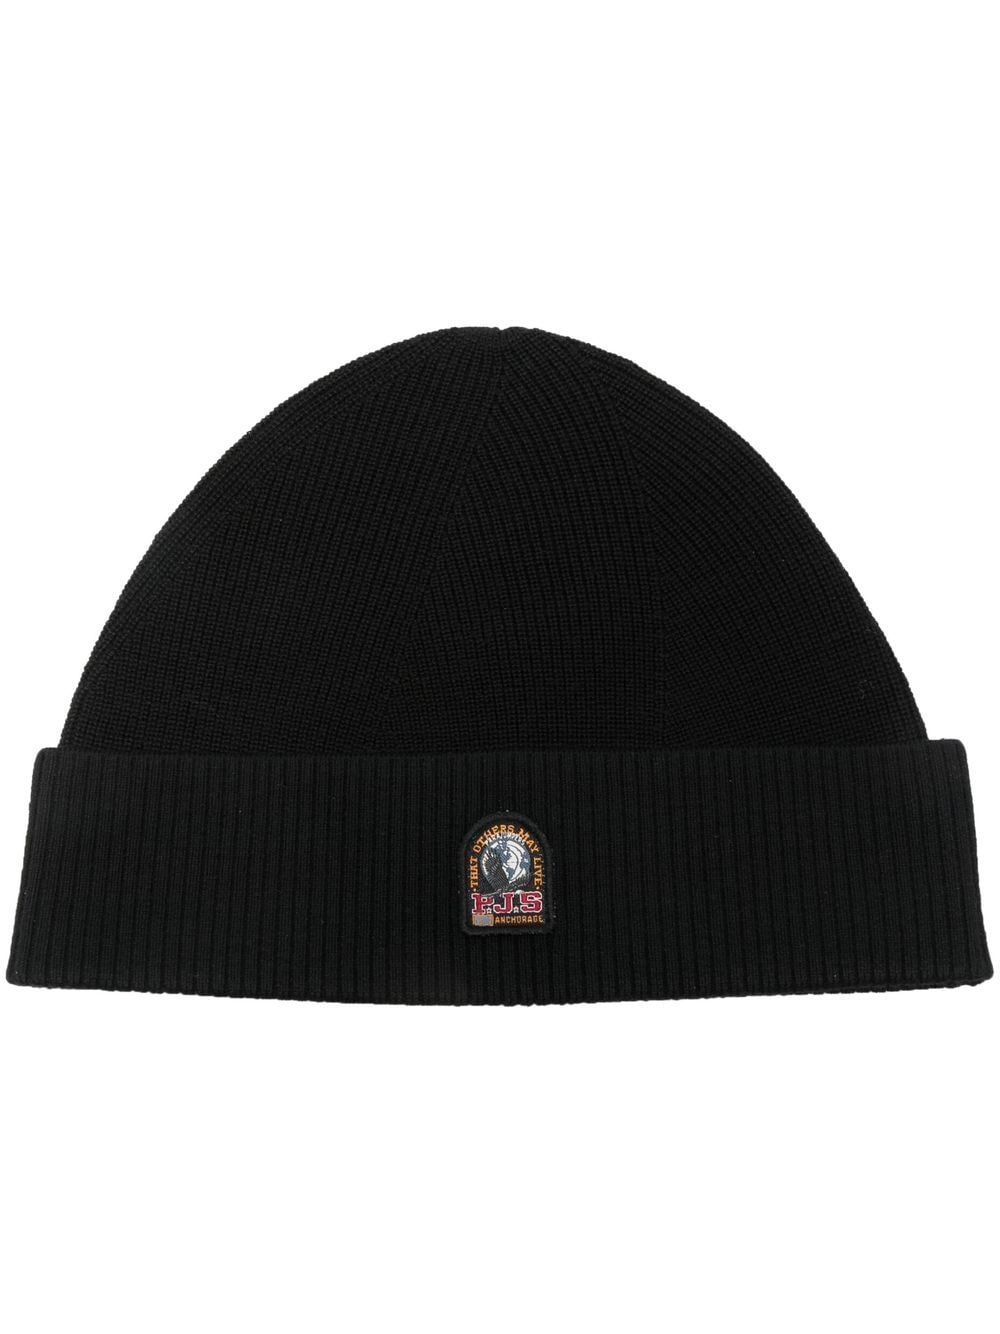 Parajumpers logo-patch knitted merino beanie - Black von Parajumpers